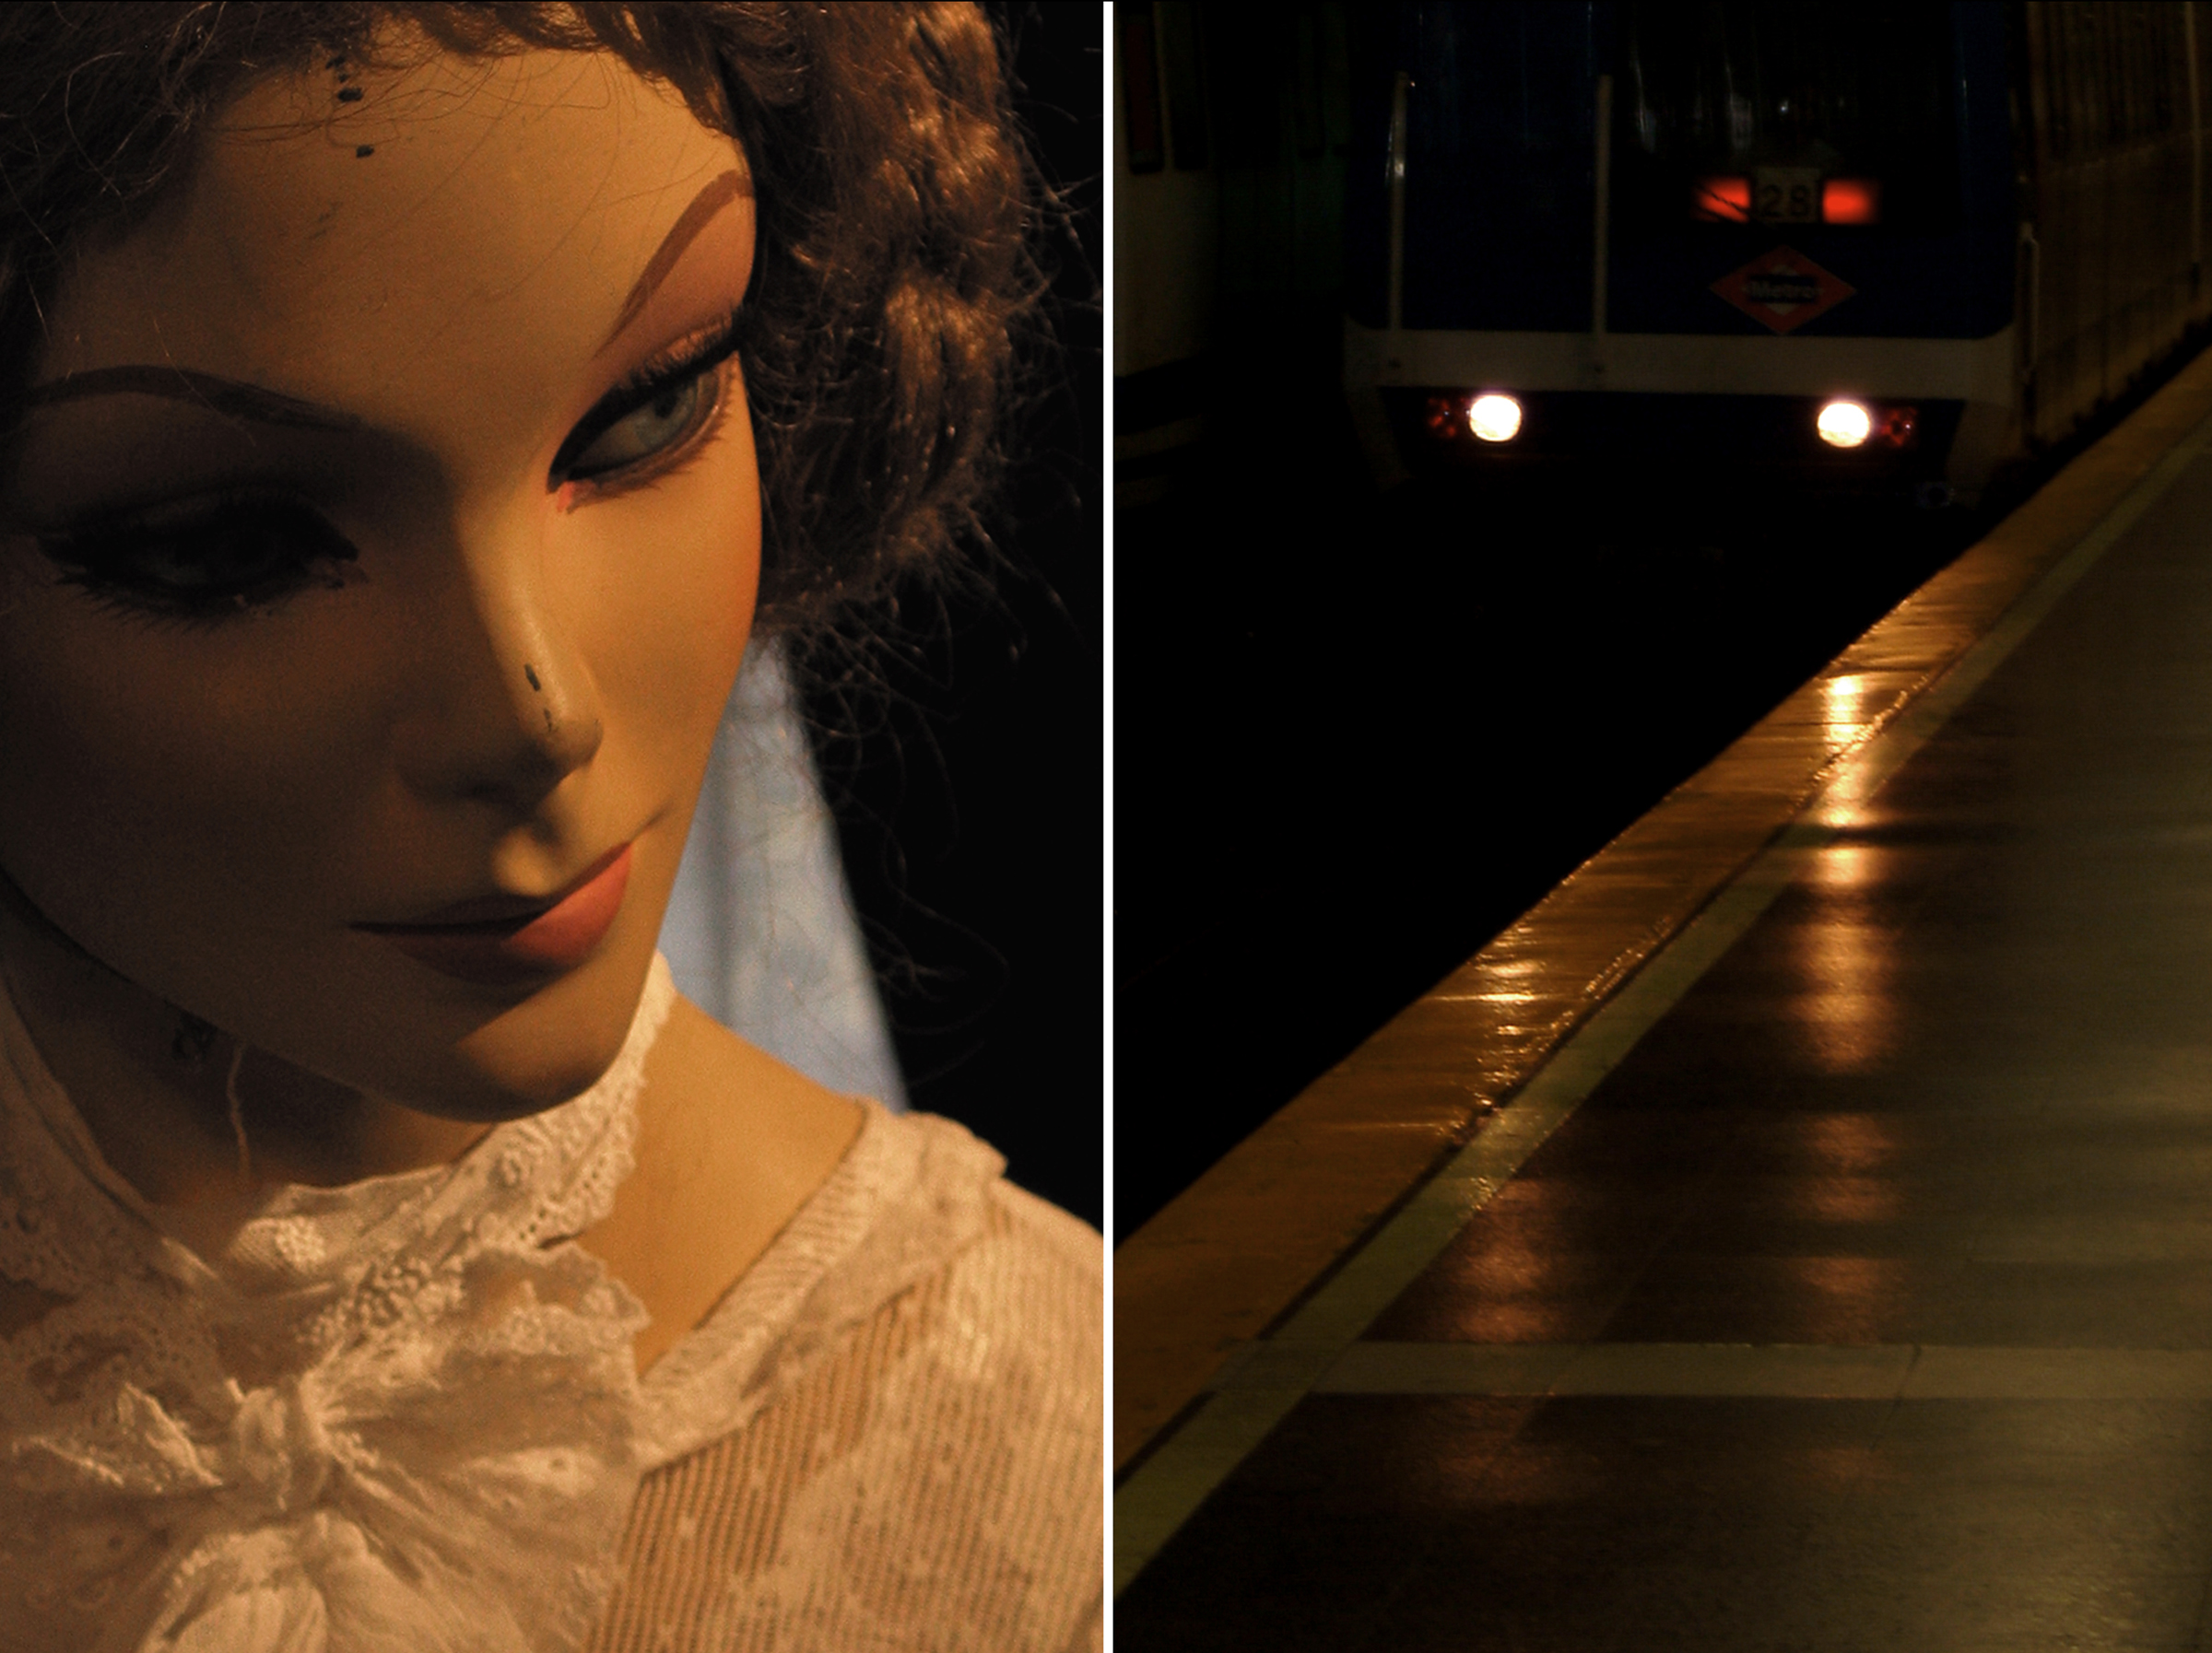 Diptych 12 lace and subway car.jpg